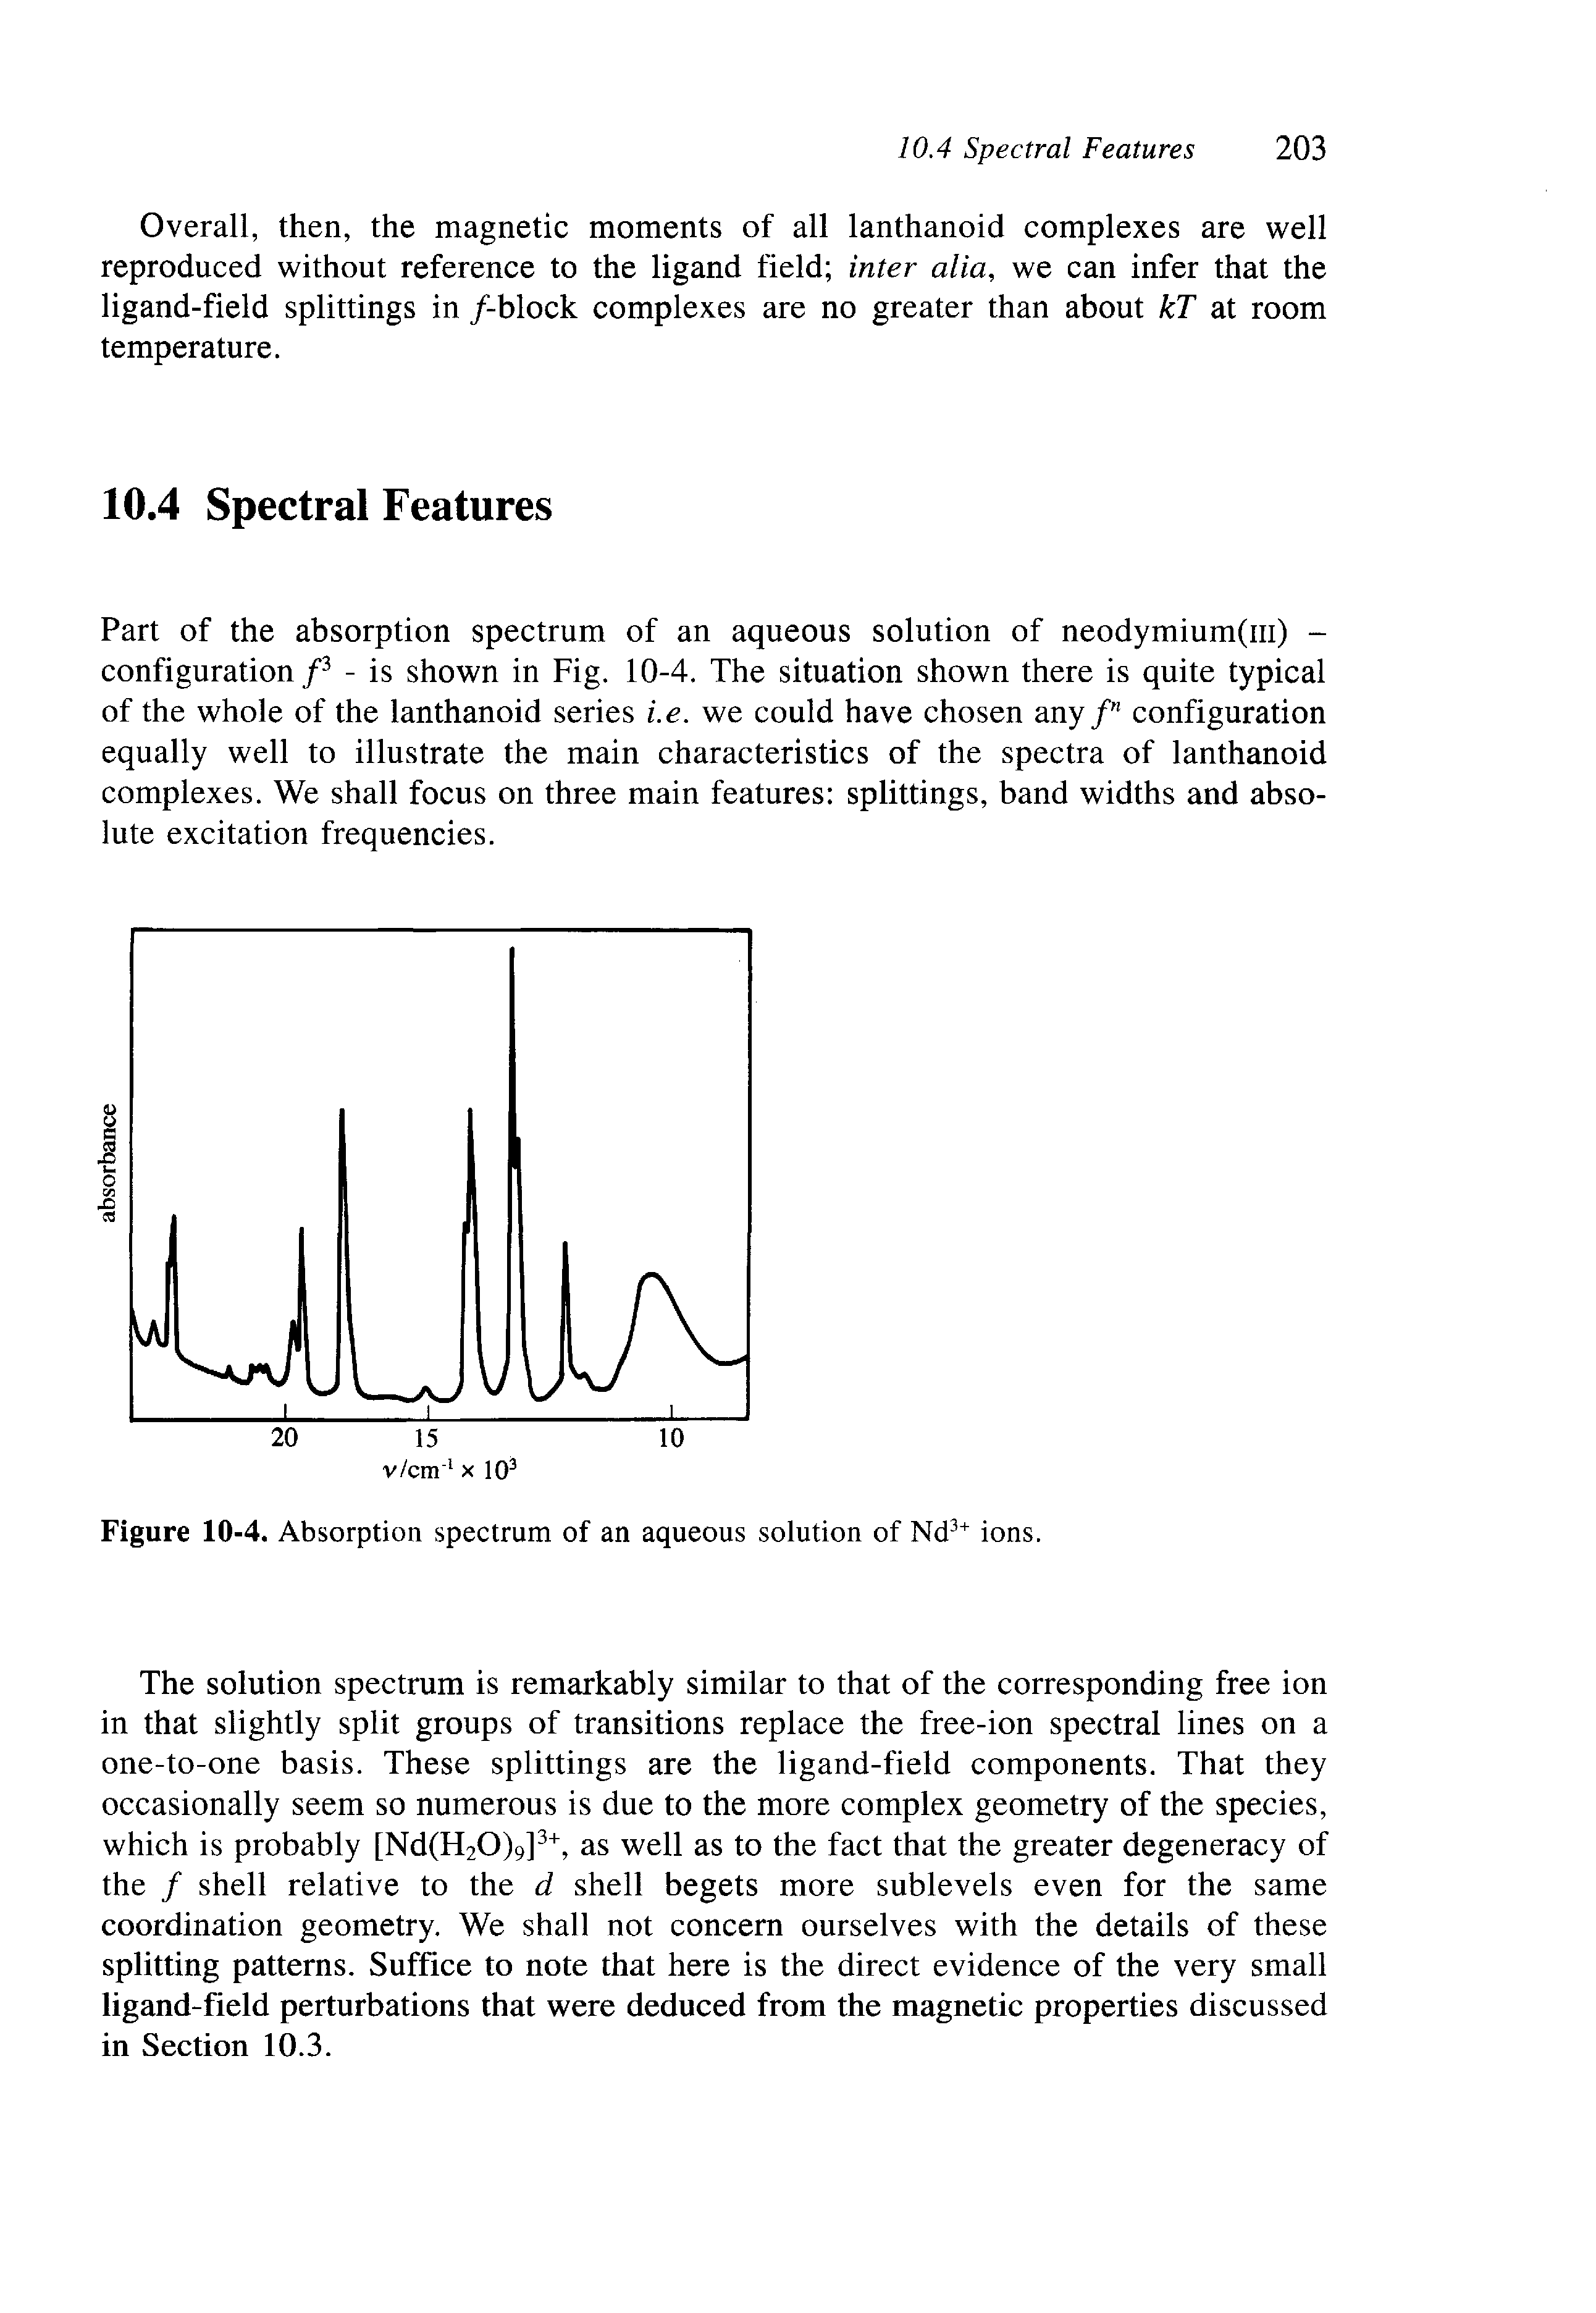 Figure 10-4. Absorption spectrum of an aqueous solution of ions.